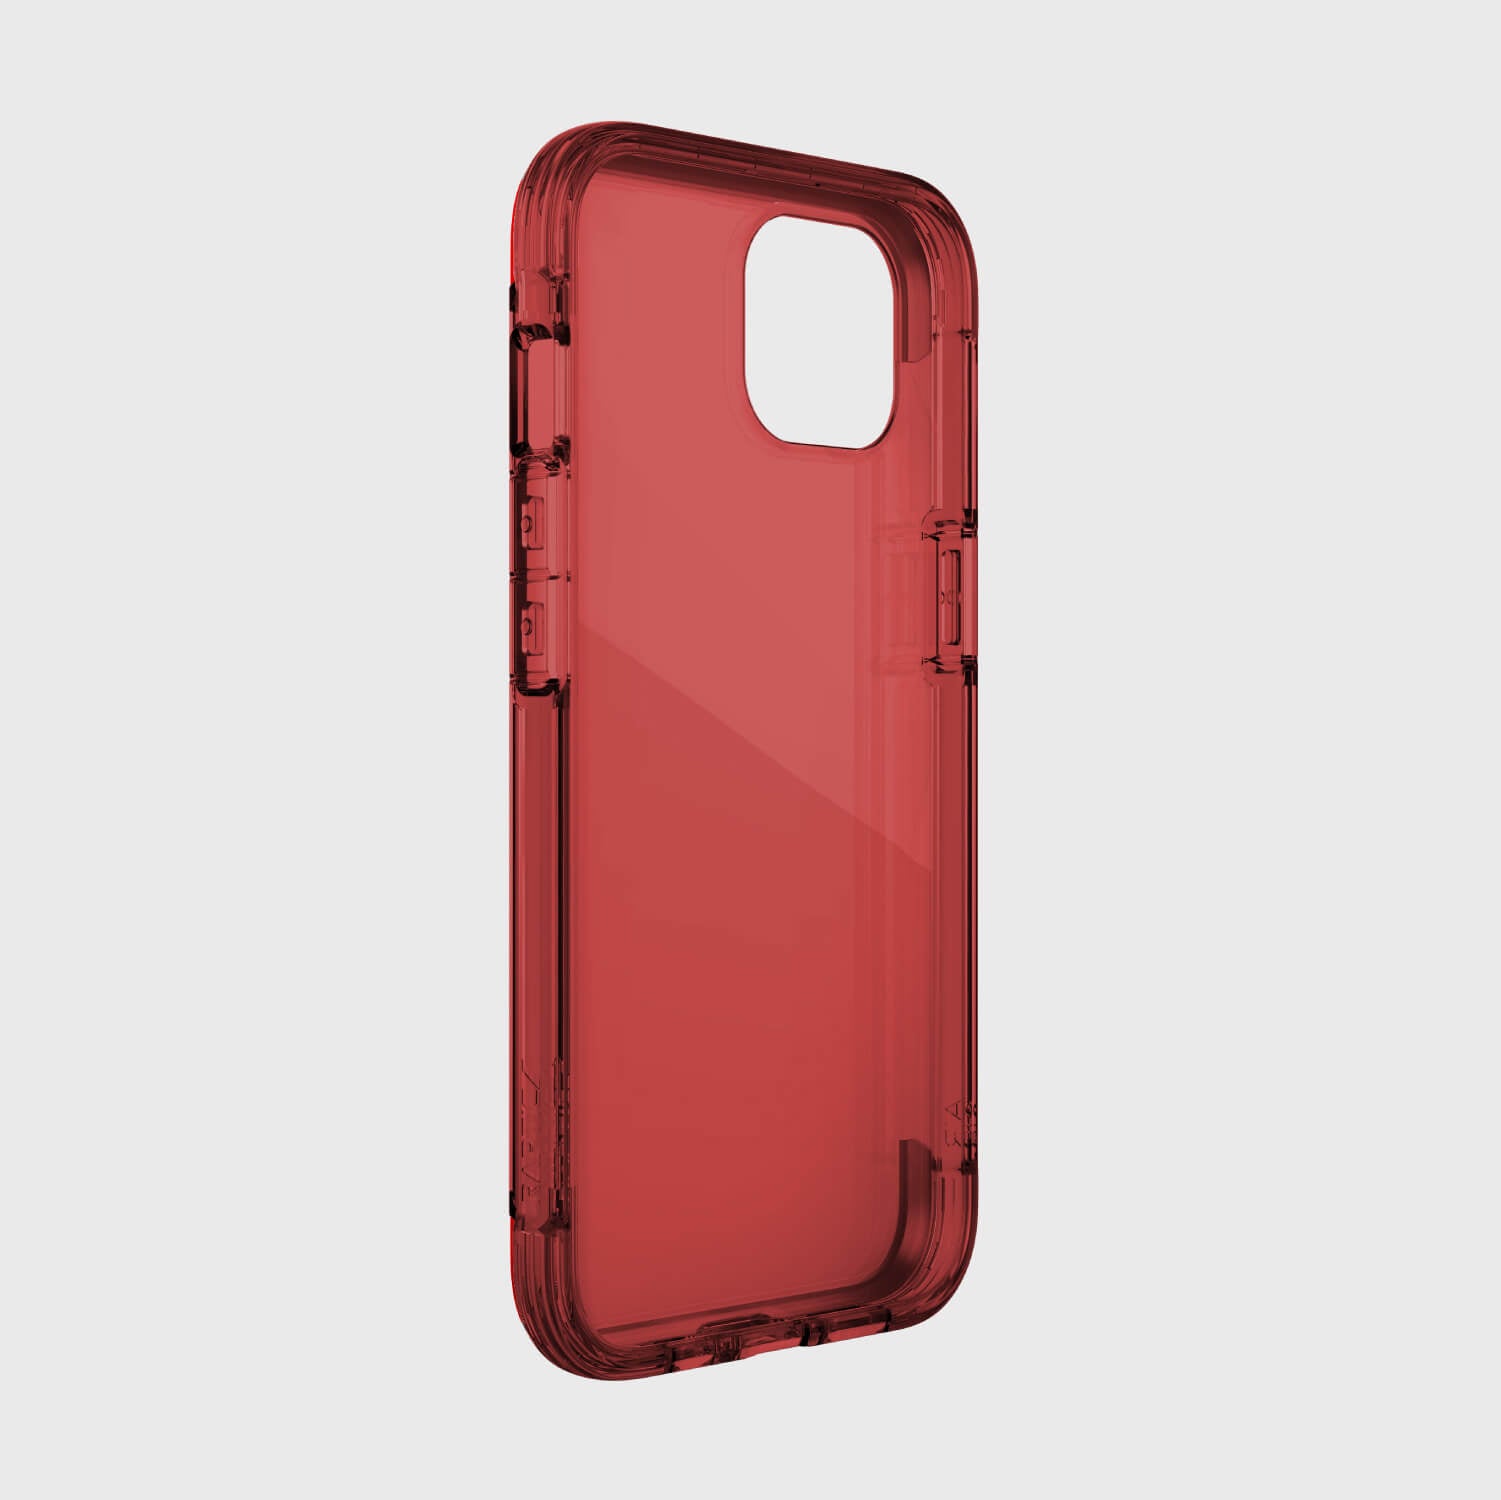 A drop proof red iPhone 13 Case - AIR by Raptic on a white background providing 13 foot drop protection. It is also wireless charging compatible.